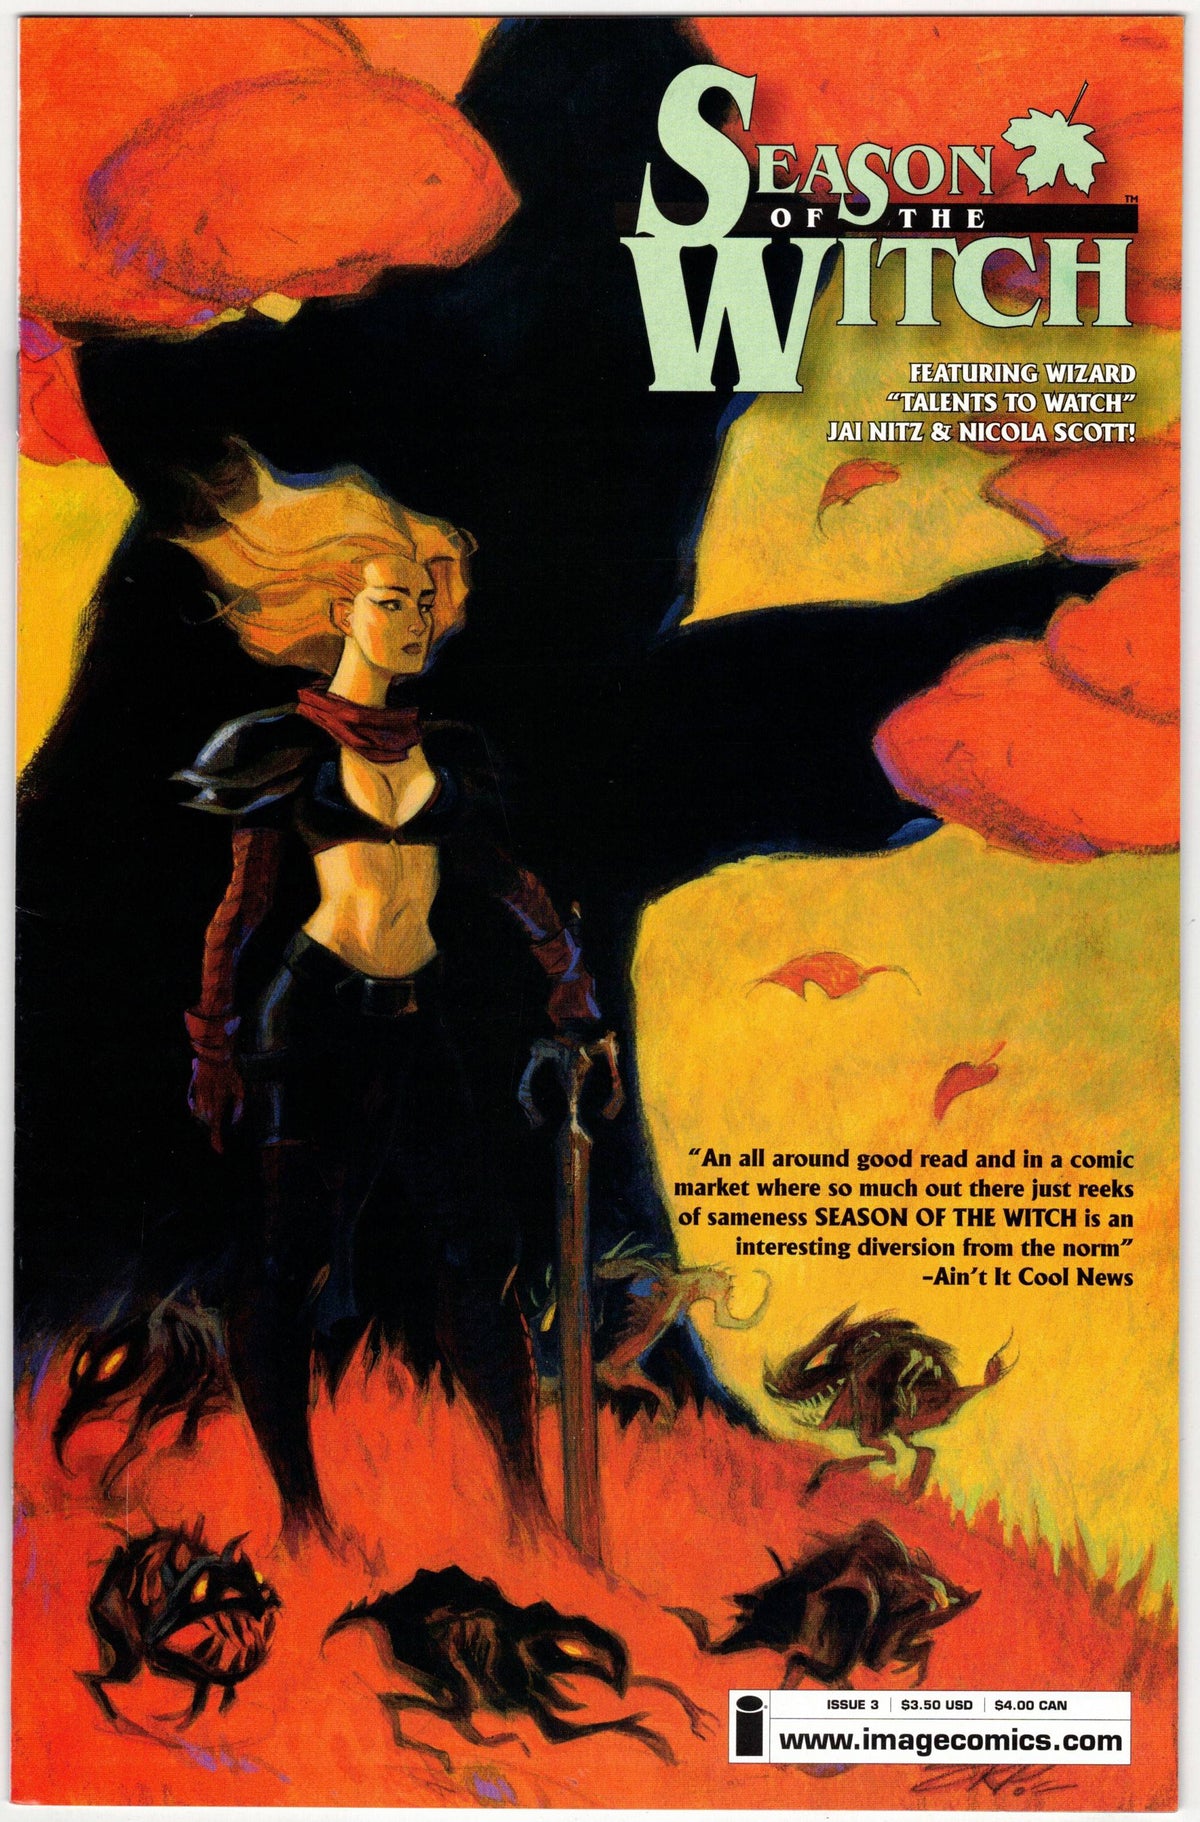 Photo of Season Of The Witch (2005) Issue 3 - Comic sold by Stronghold Collectibles